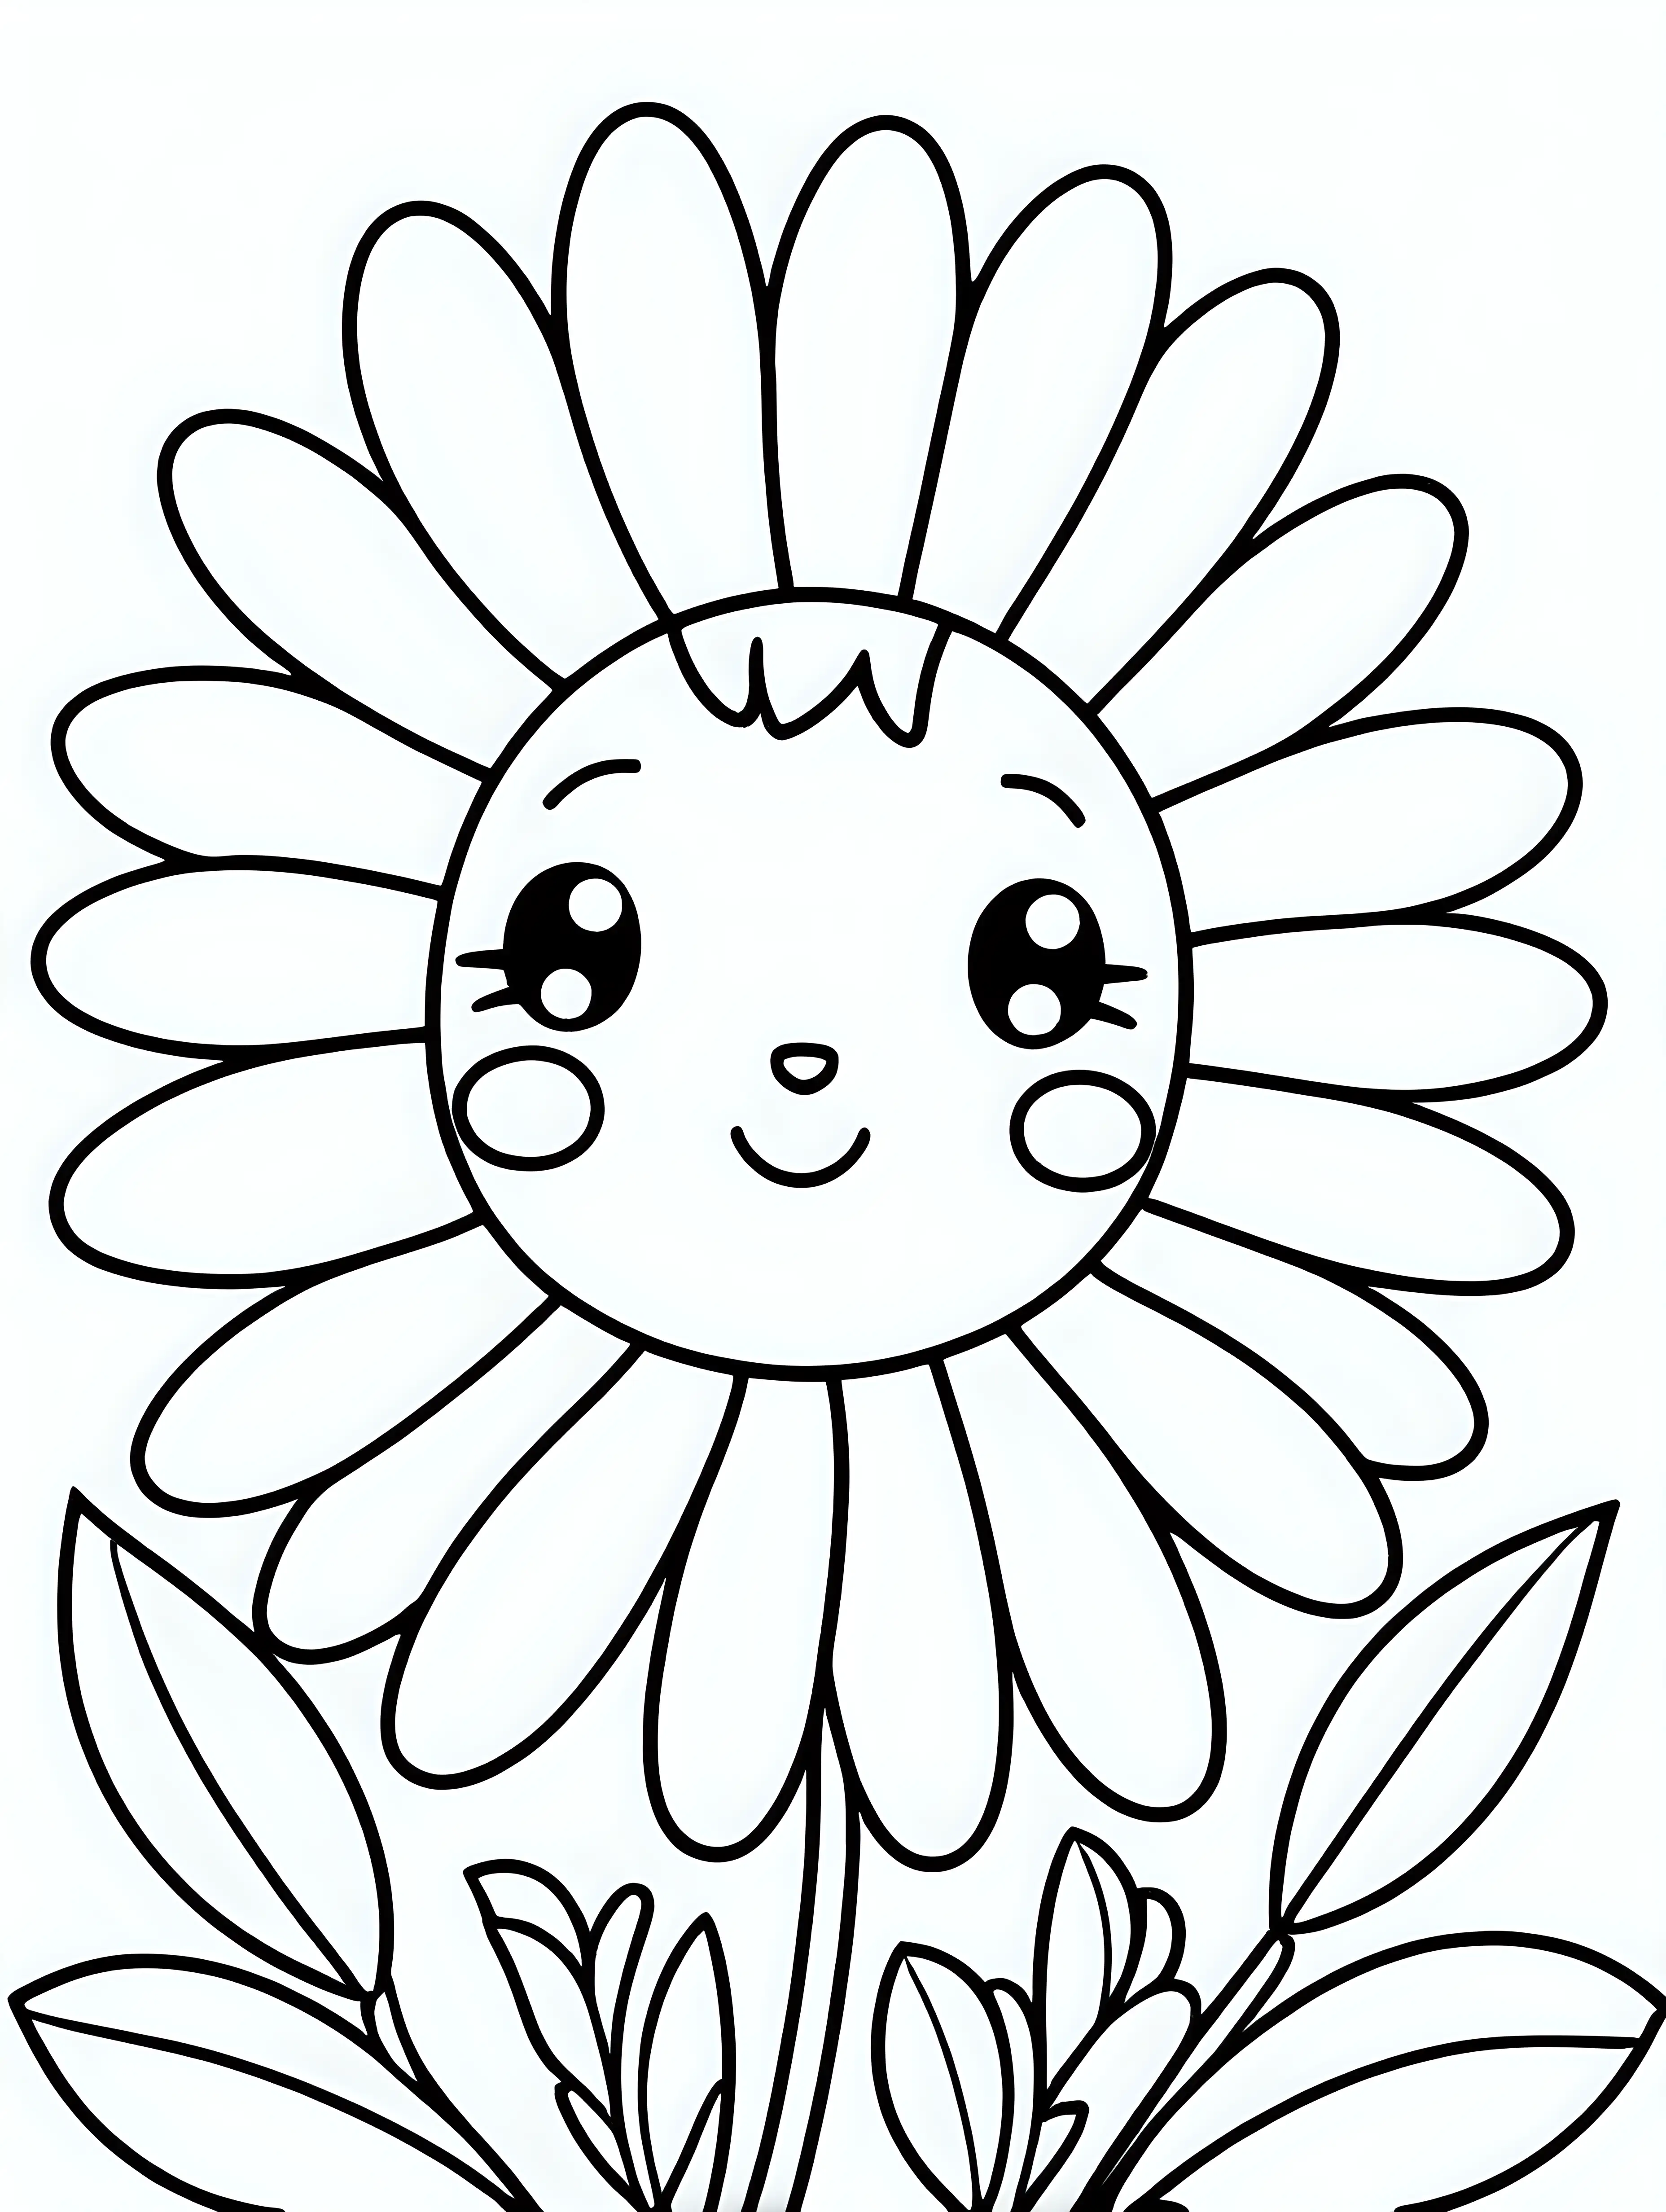 Coloring page for kids, kawaii daisy, cartoon style, thick lines, no shading